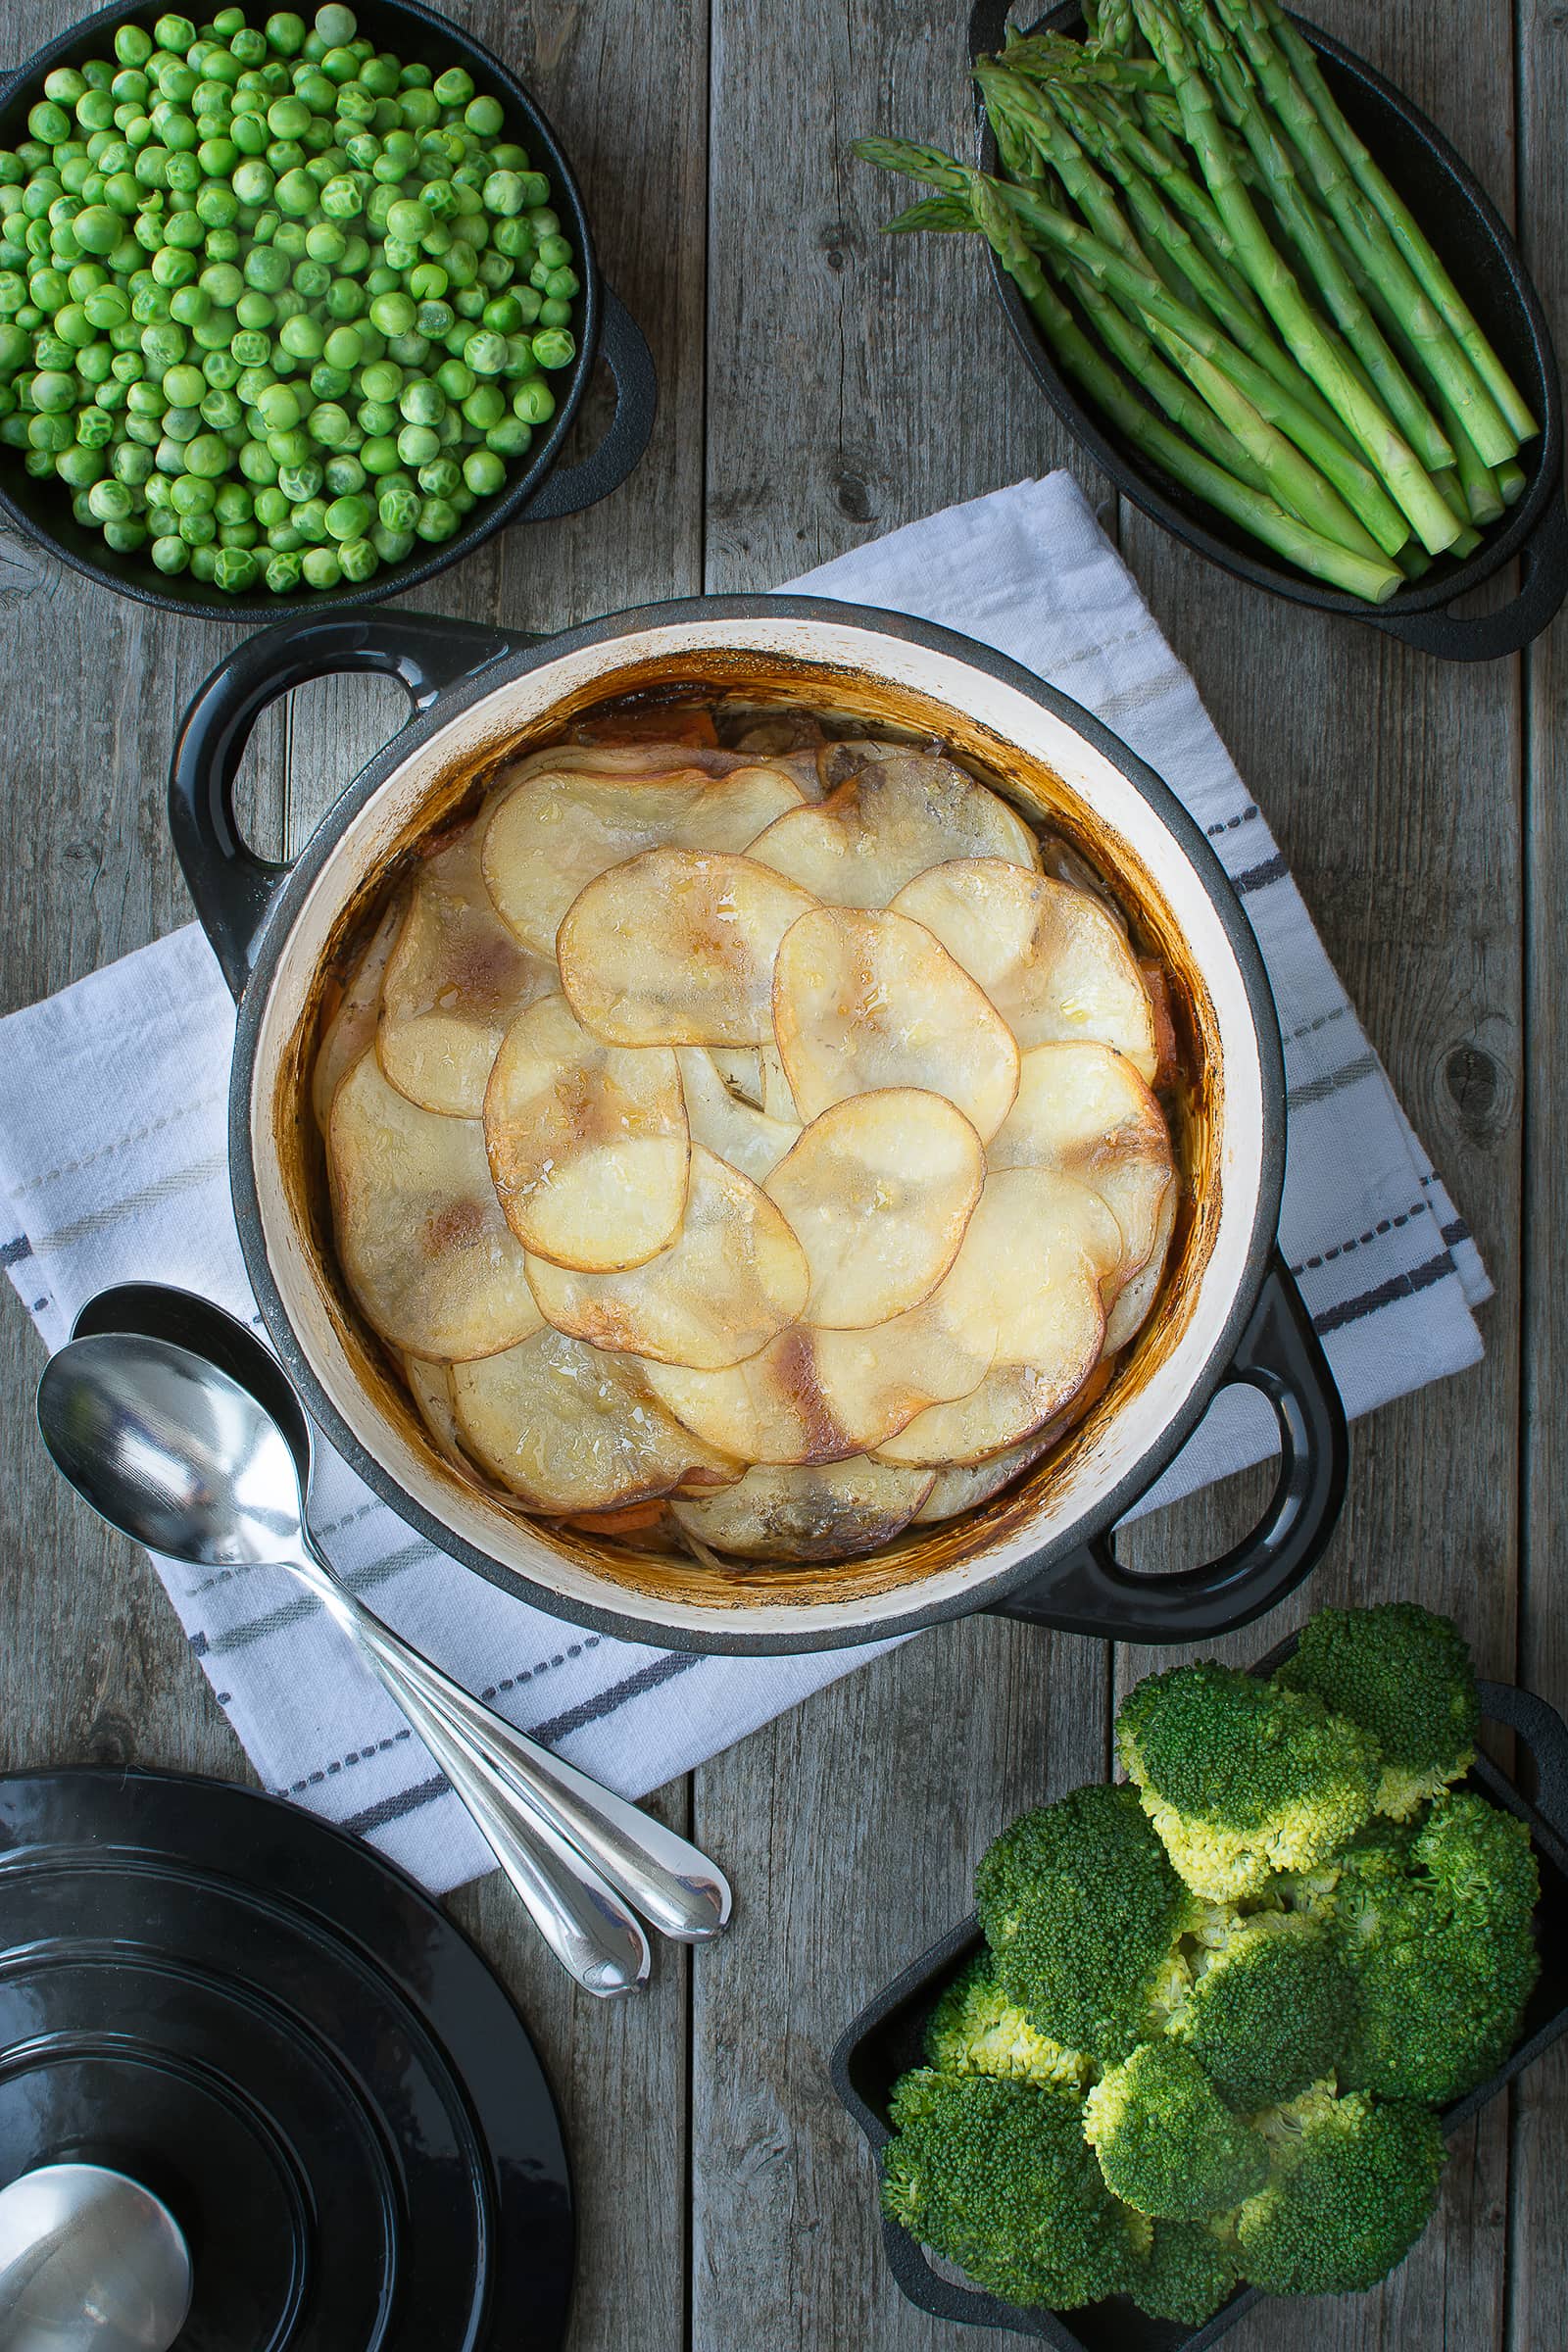 My take on a traditional Lancashire Lamb Hotpot - melt-in-the-mouth lamb and vegetables topped with crisp buttery potatoes.